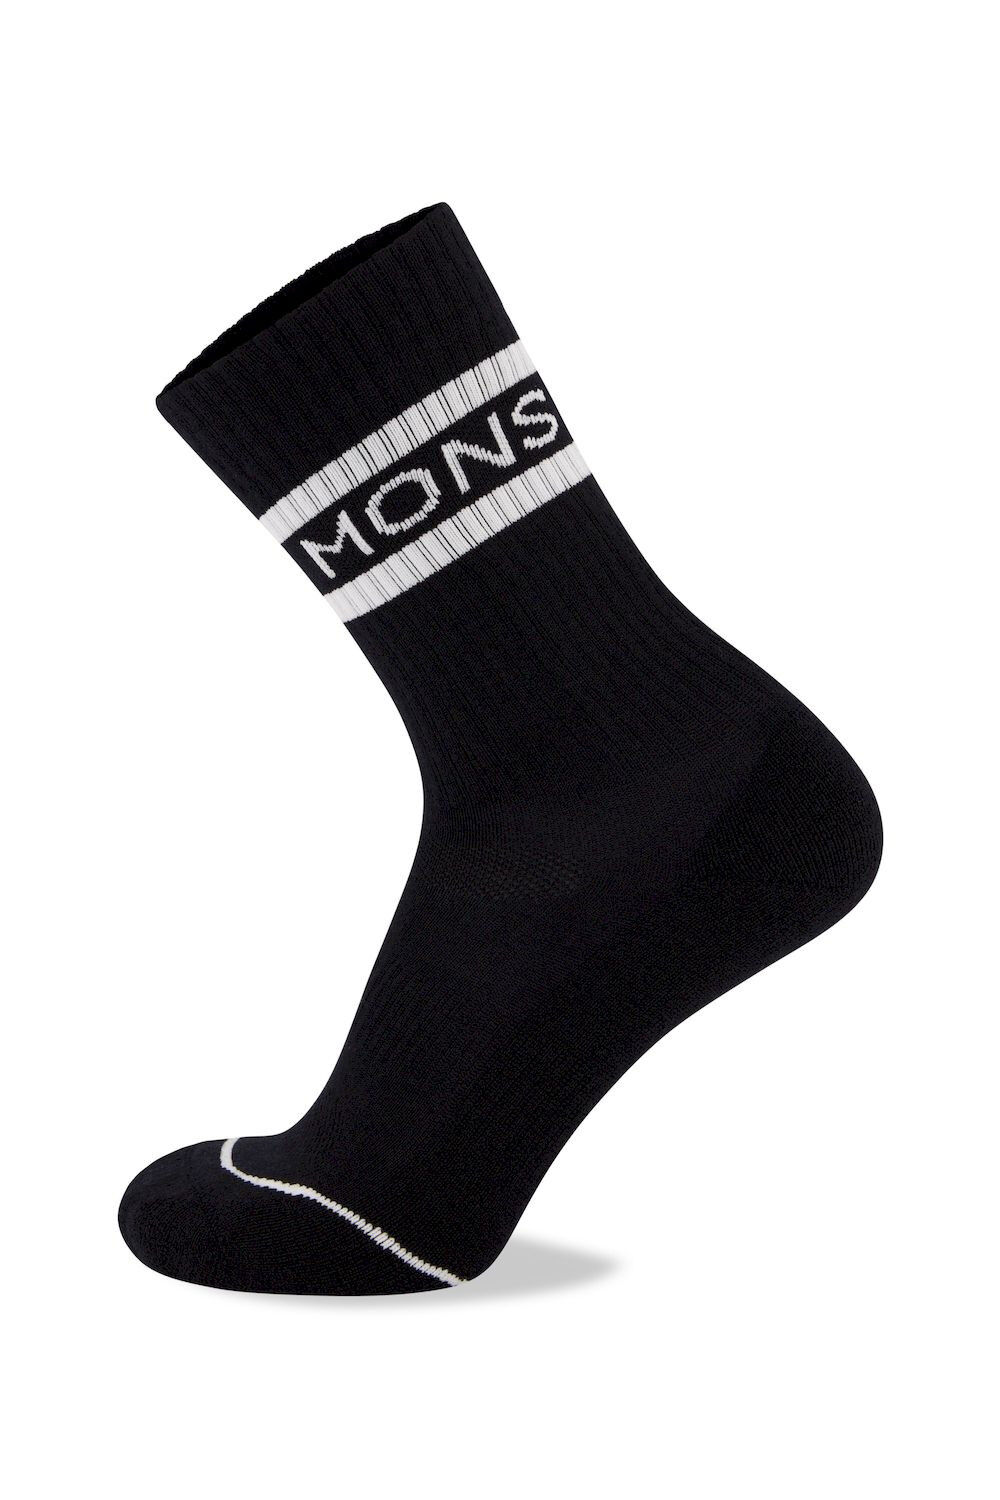 Mons Royale Signature Crew Sock - Cykelsokker